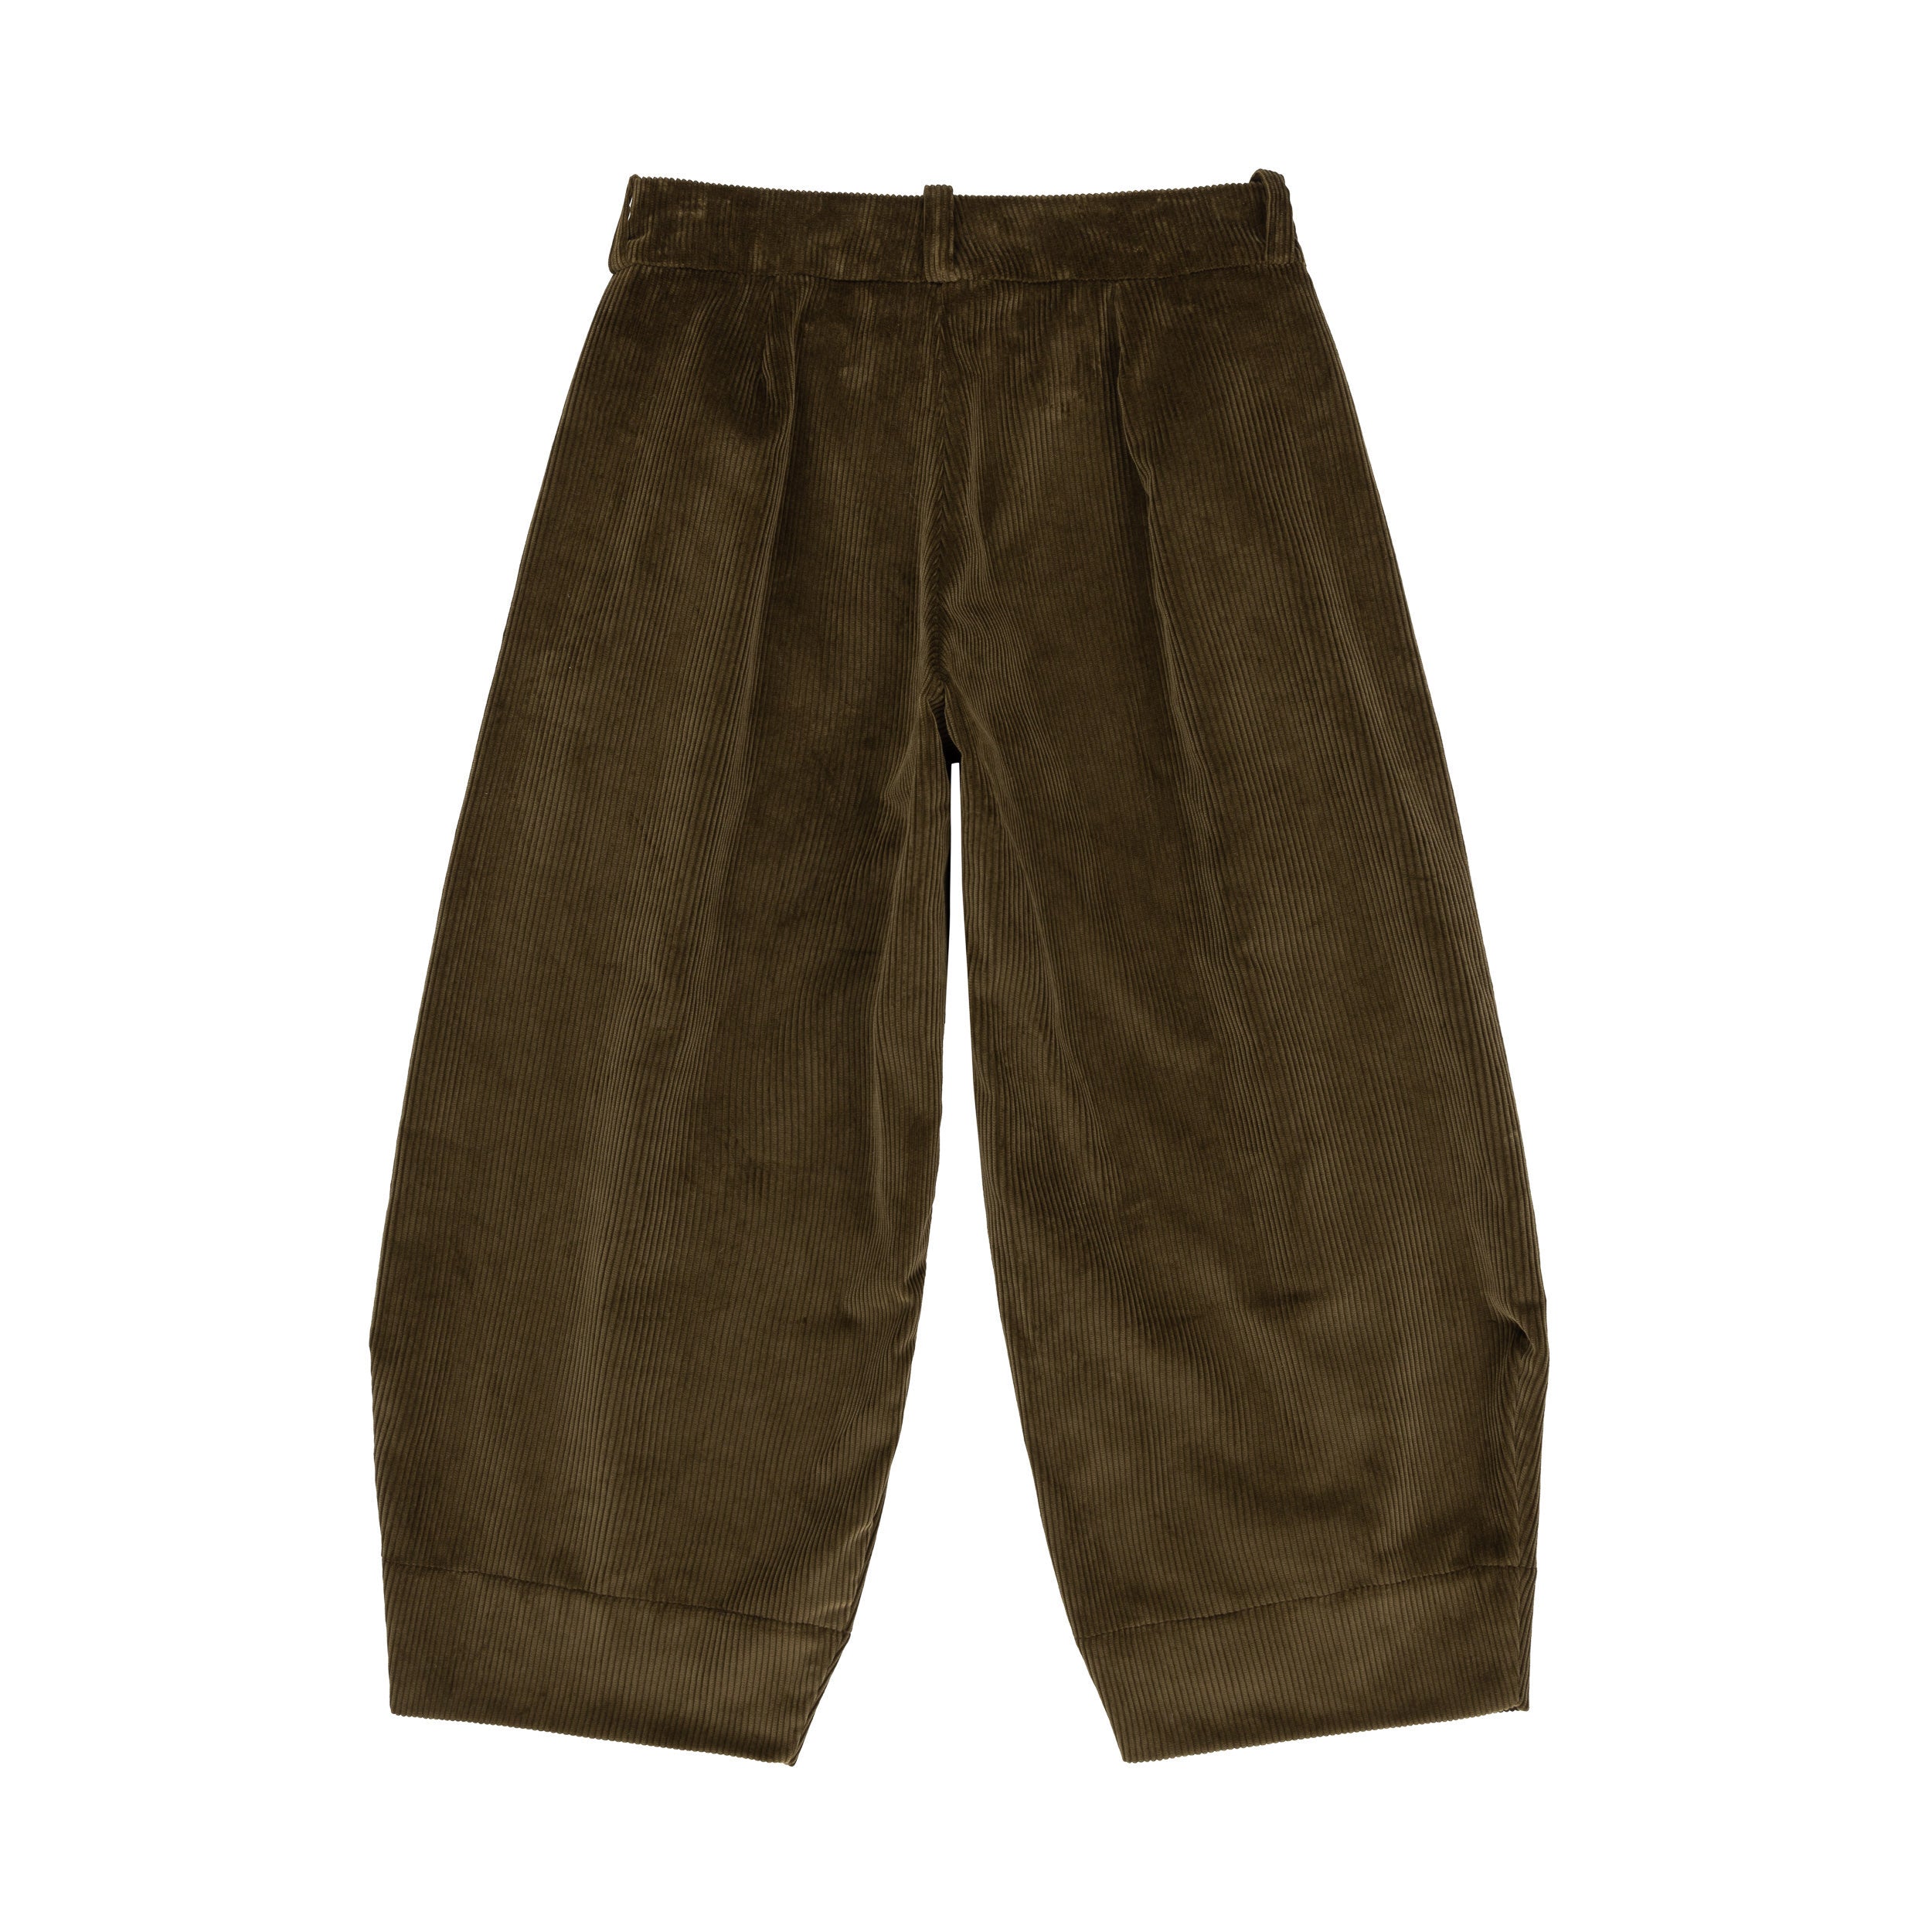 Carrier Company Dutch Trouser in Corduroy